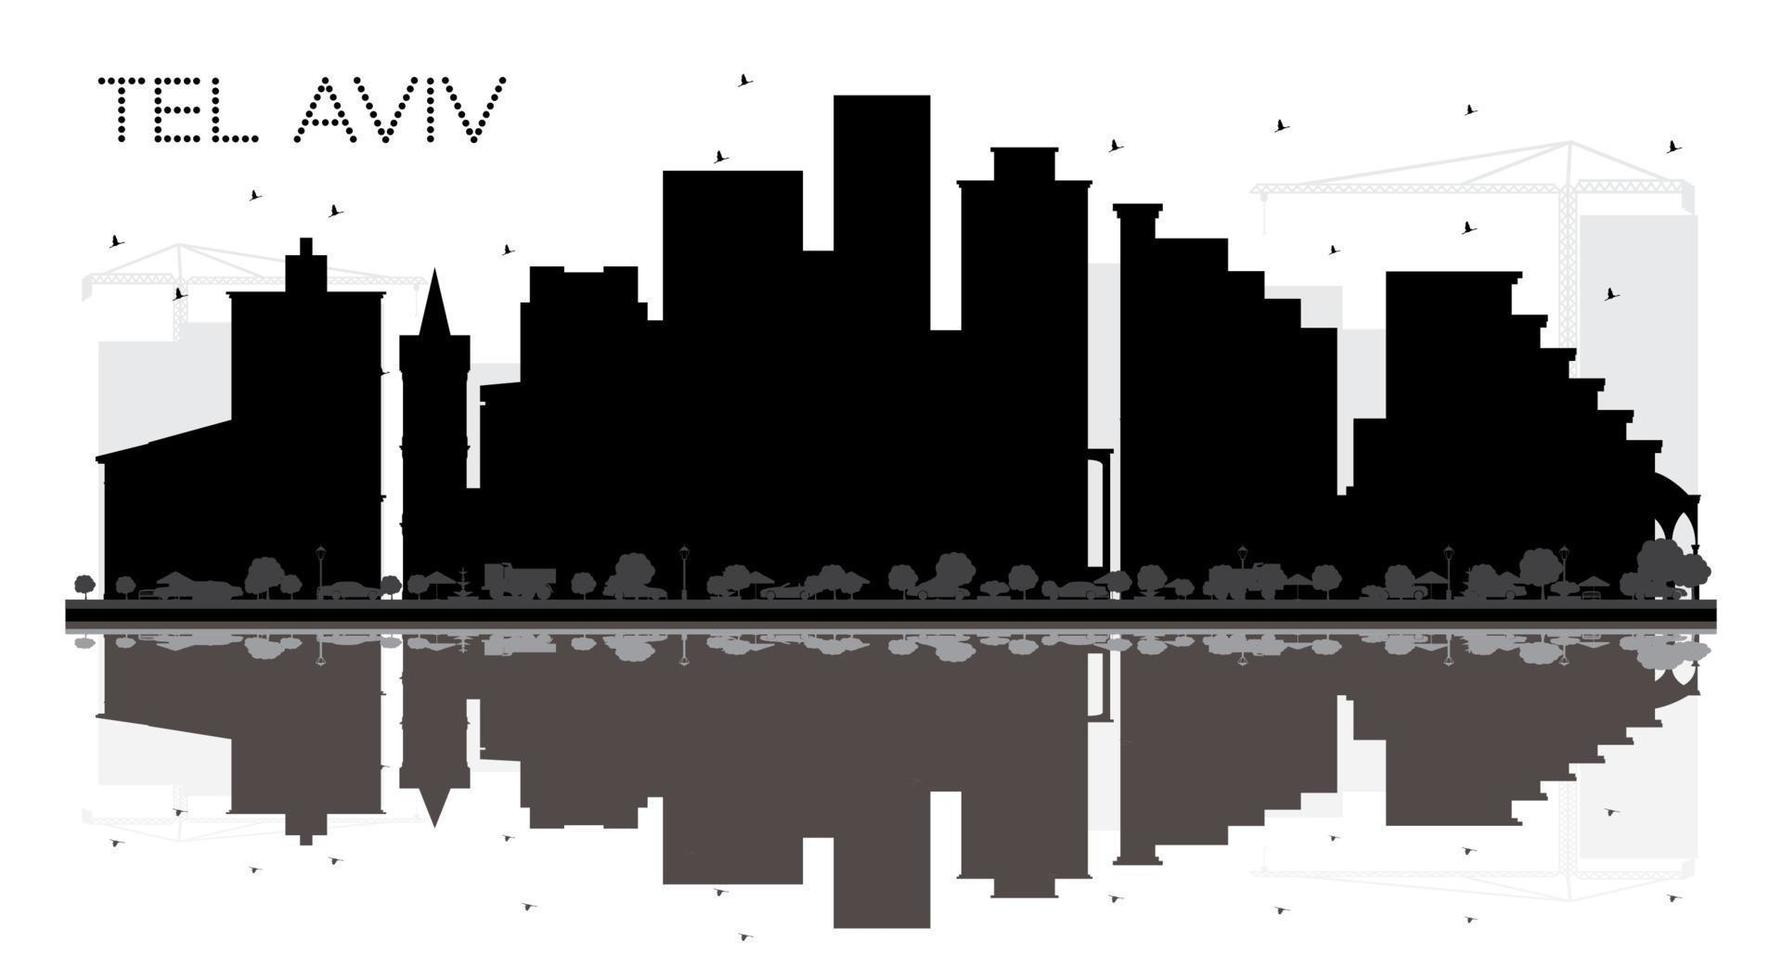 Tel Aviv Israel City skyline black and white silhouette with Reflections. vector